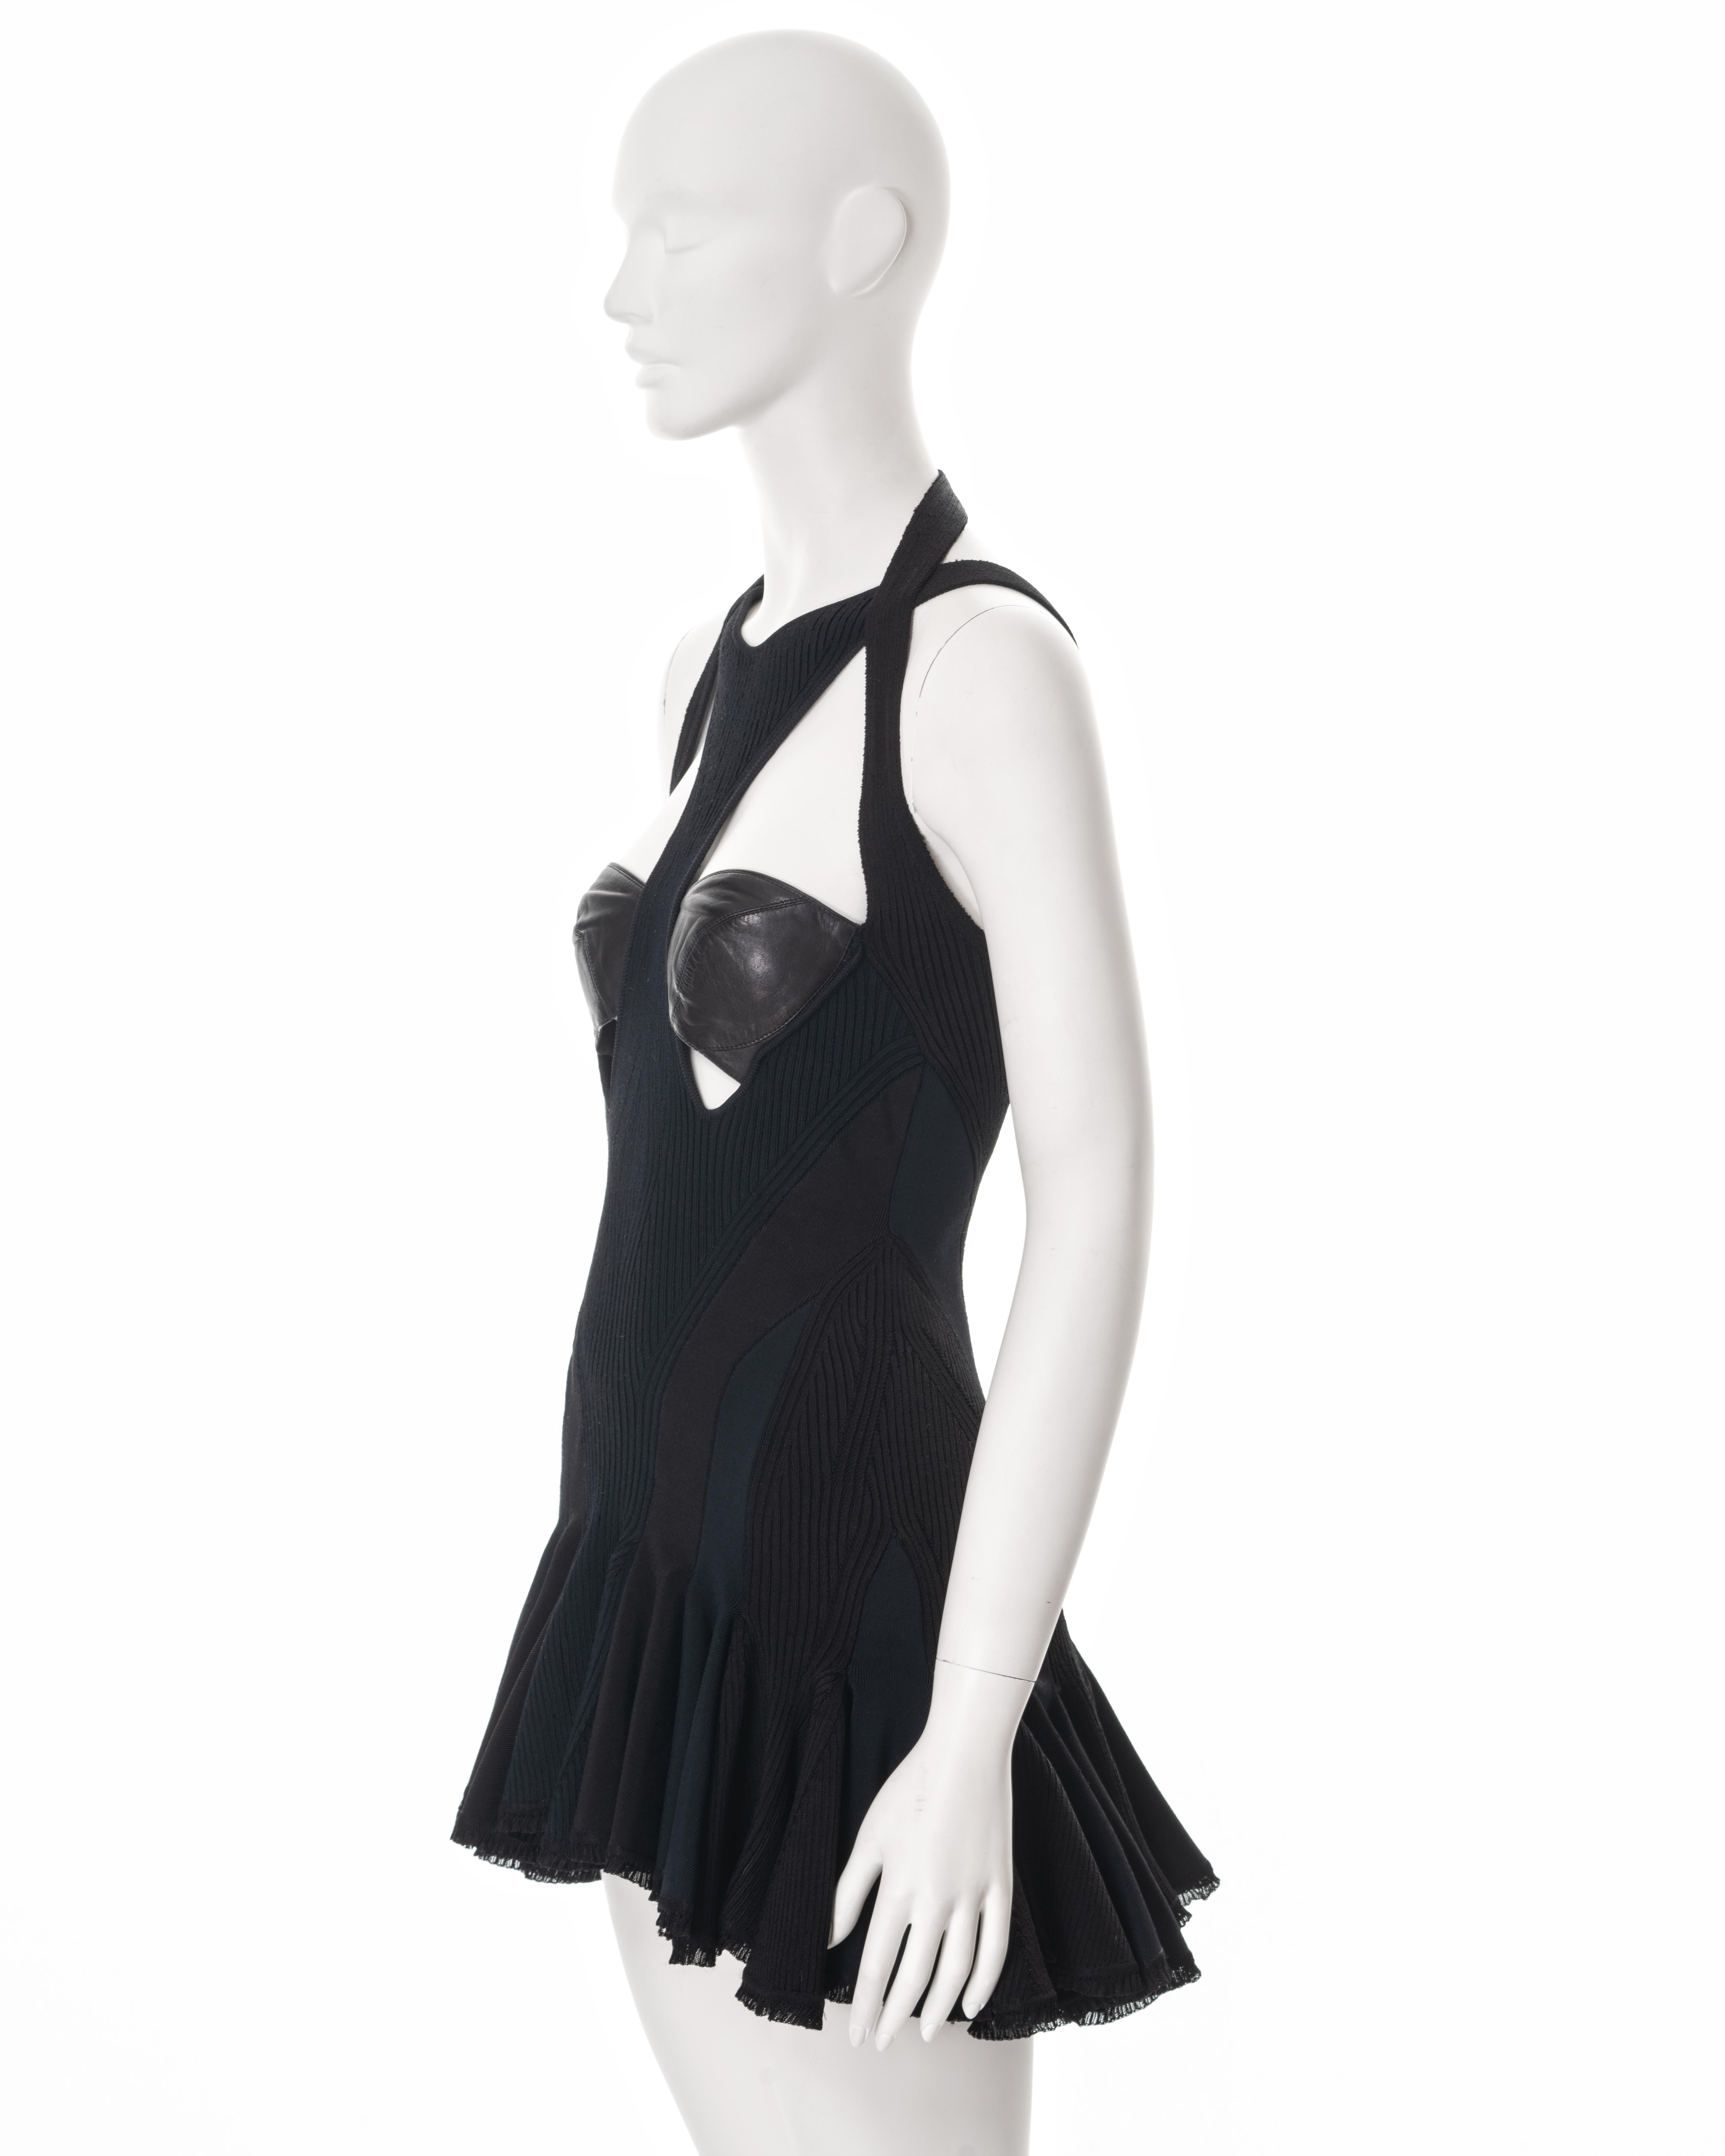 Alexander McQueen black rib knit mini dress with leather bustier, ss 2004 For Sale 6